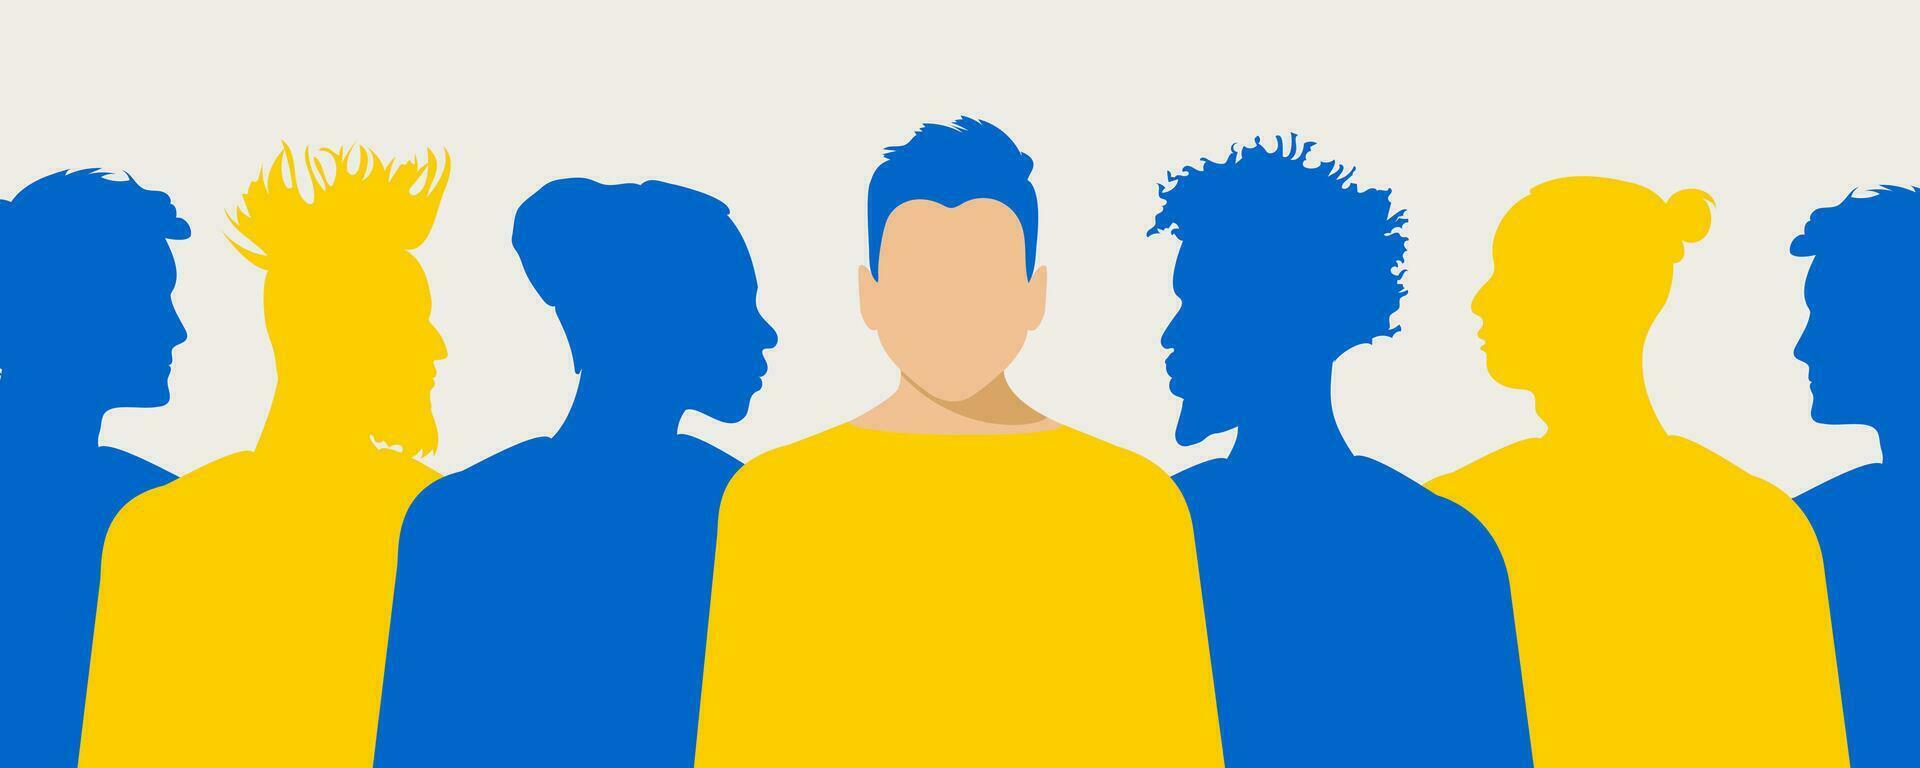 Men of different nationalities and religions stand together. Design in flat blue and yellow color style. Father's Day. LGBT communities fight for equal rights. Vector. vector